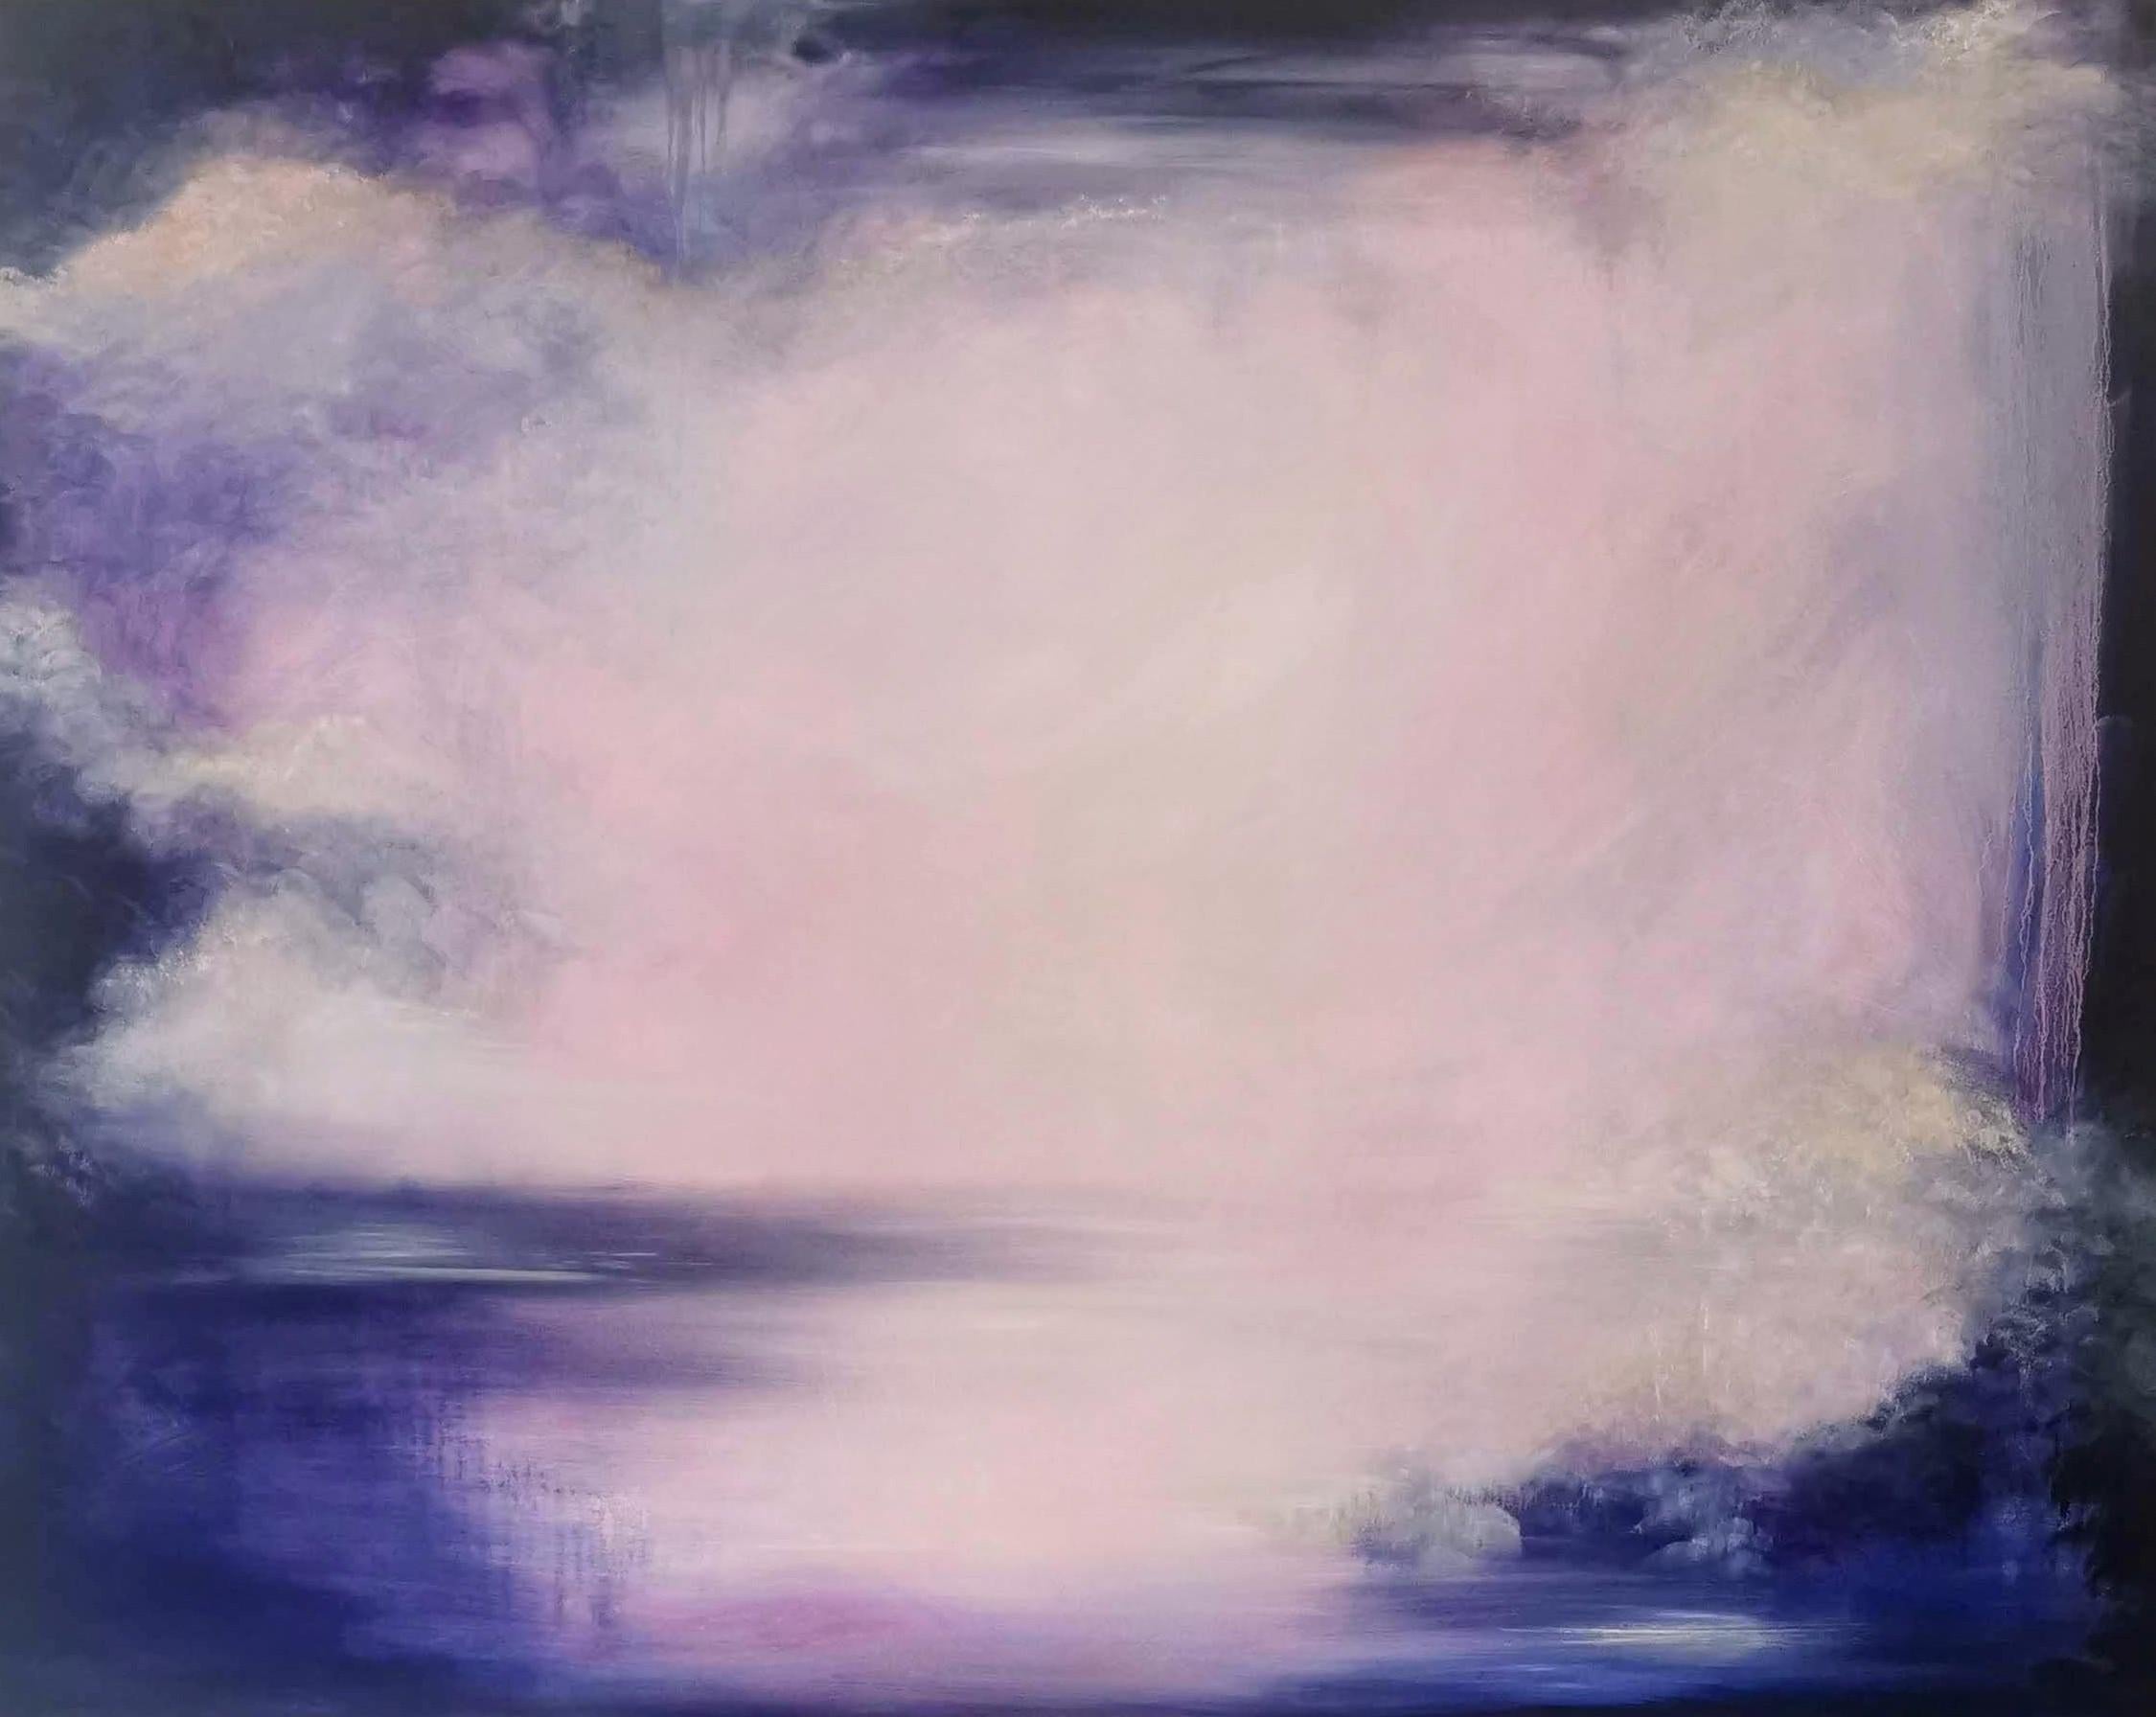 Jennifer L. Baker Abstract Painting - Violet night of the soul - Large violet abstract landscape painting